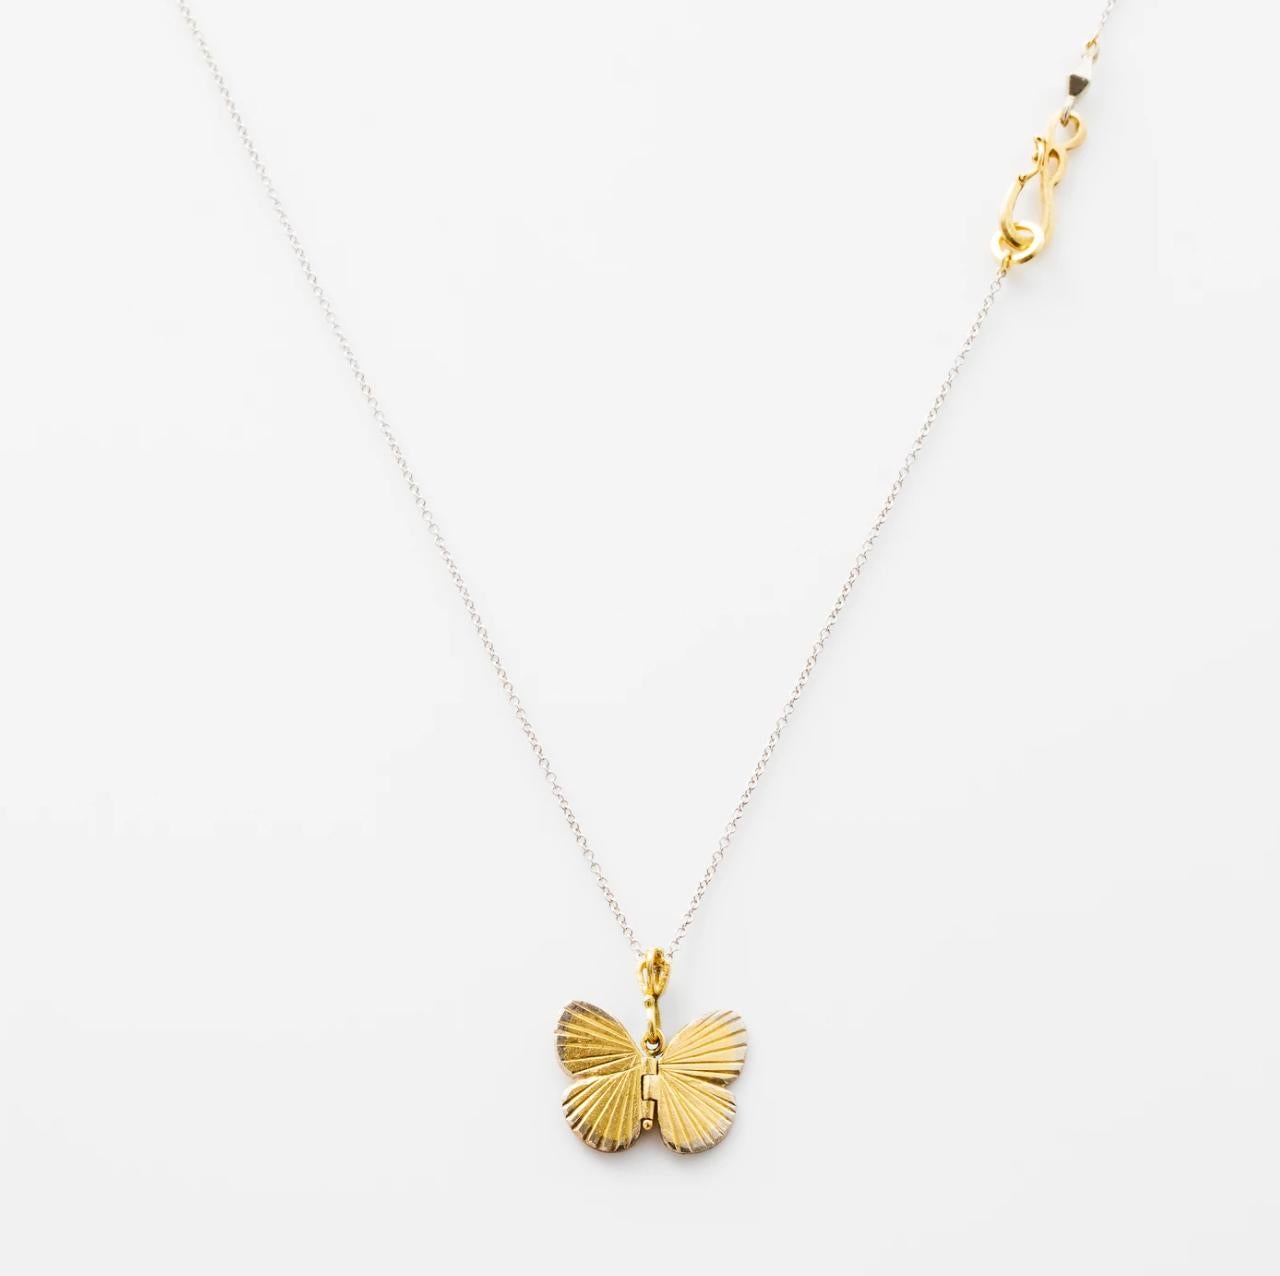 James Banks's signature butterfly necklace features a Baby Asterope butterfly with a hinge at the center to allow movement of the wings, set in 18k Yellow Gold with 18k White Gold inlay trim and hung on a 17